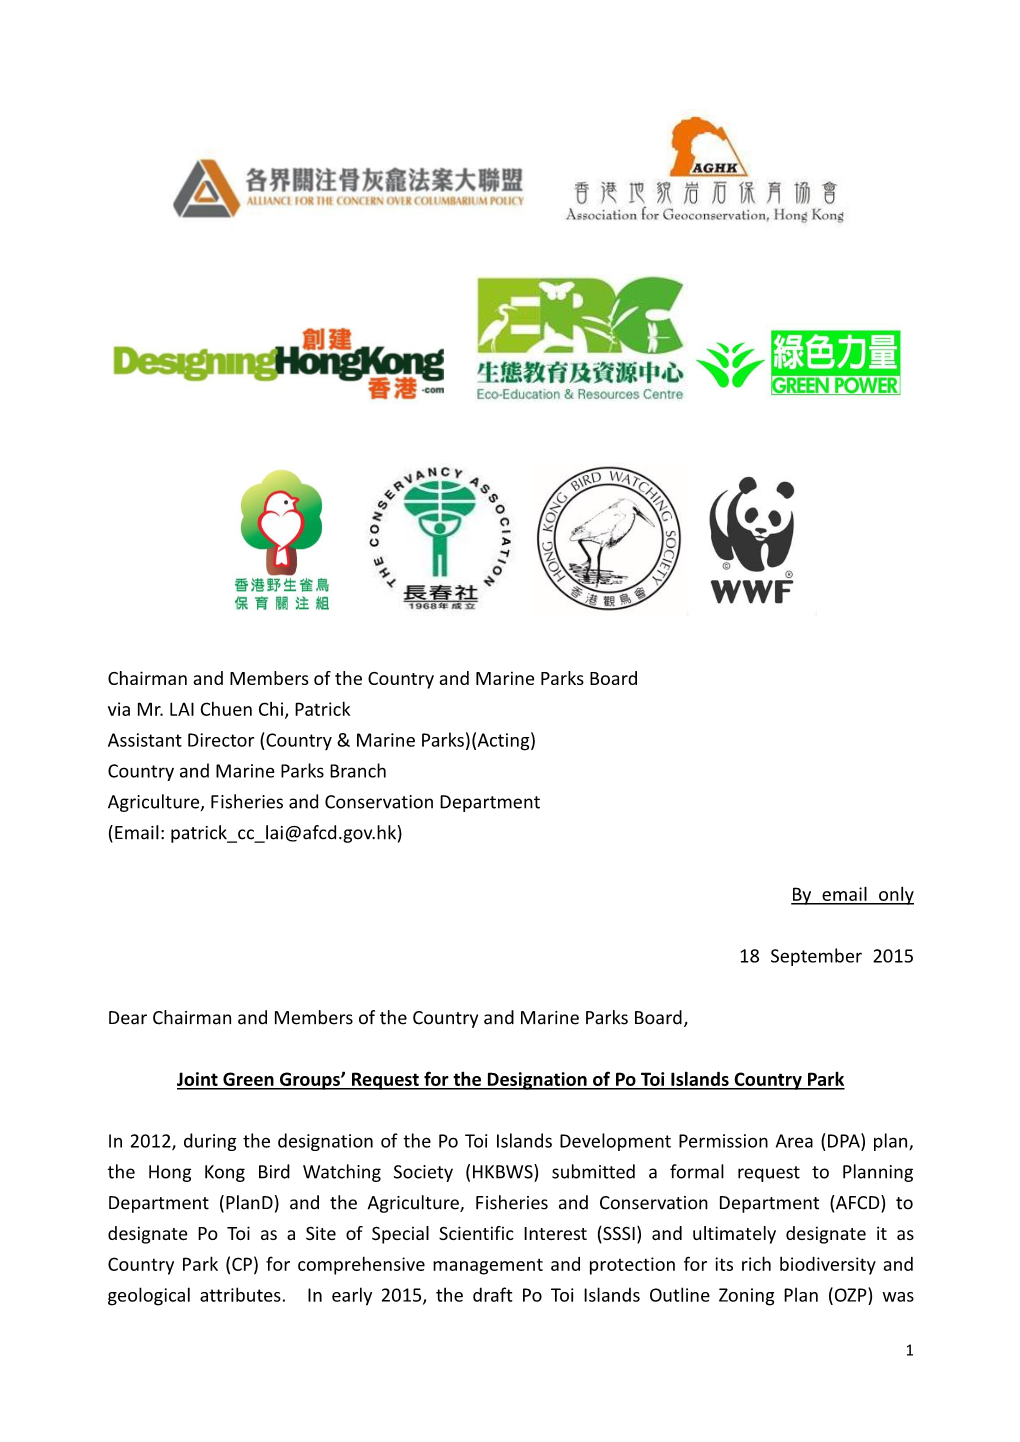 Chairman and Members of the Country and Marine Parks Board Via Mr